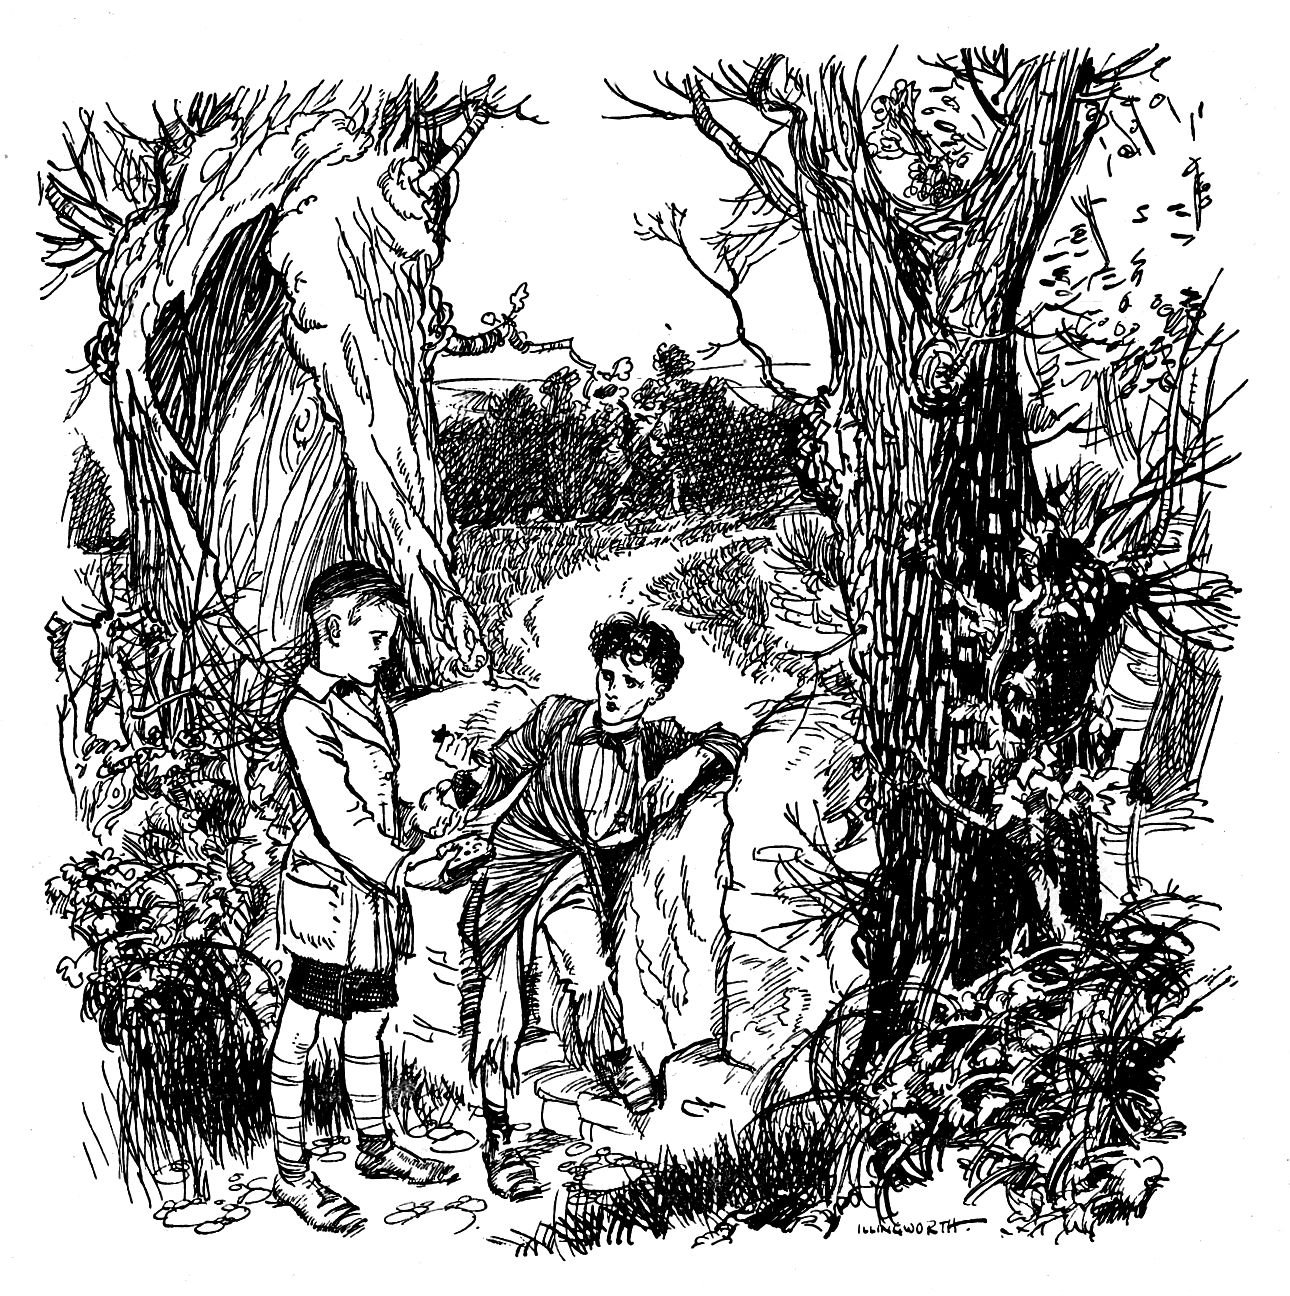 Two boys at a forest path.